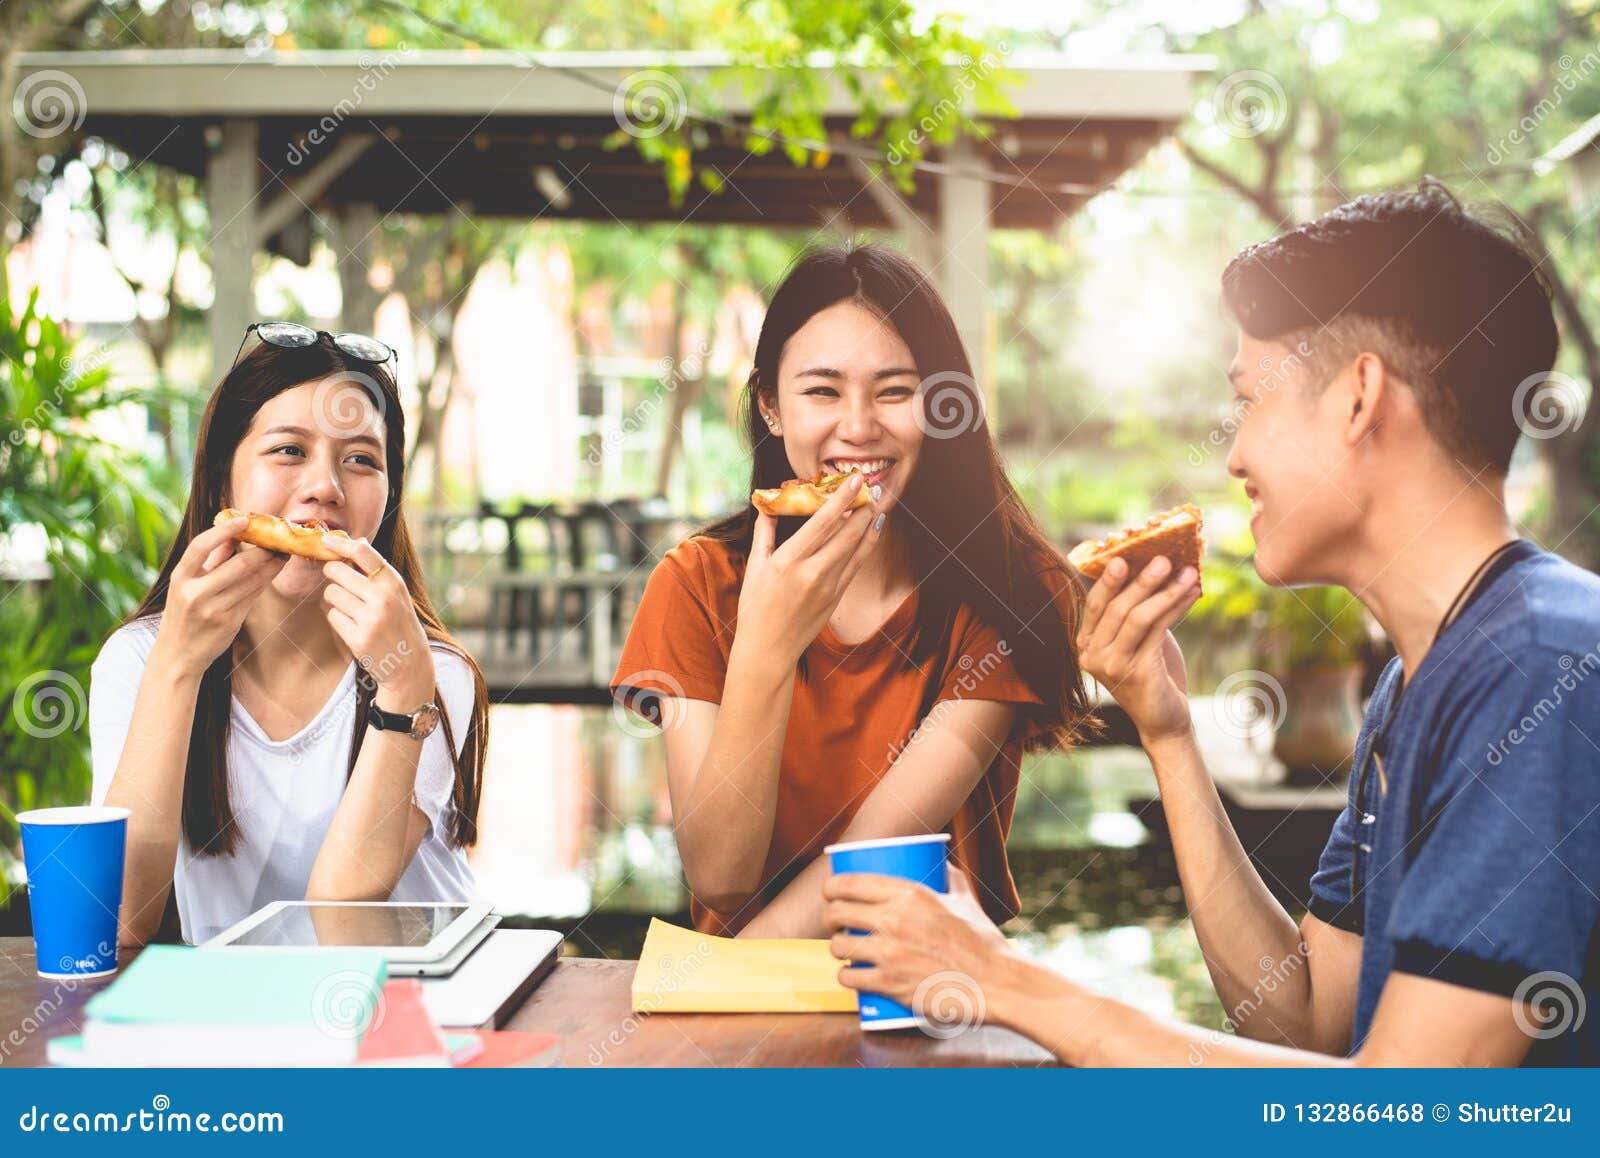 young asian people eating pizza together by hands. food and friendship celebration party concept. lifestyles and people in theme.